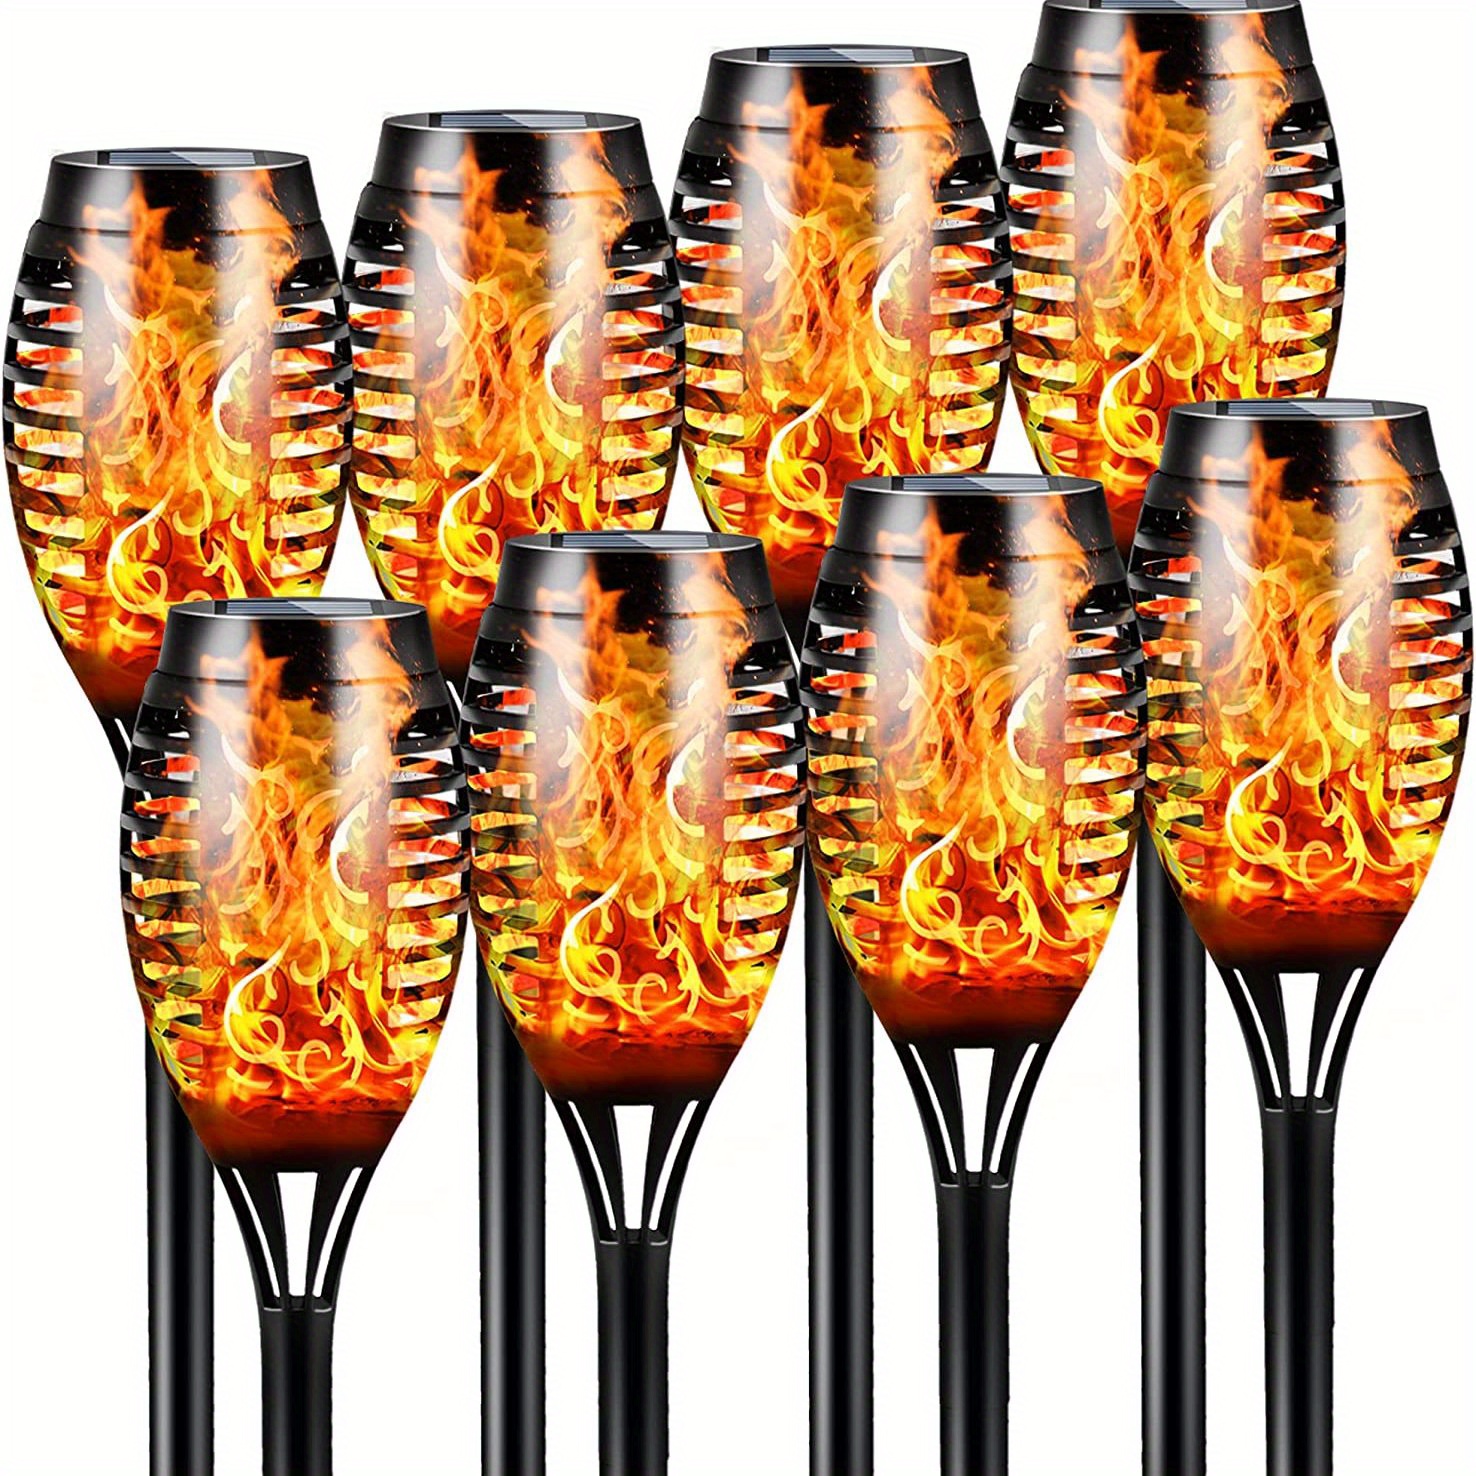 4pcs 6pcs Solar Outdoor Lights Solar Tiki Torches With Flickering Flame ...